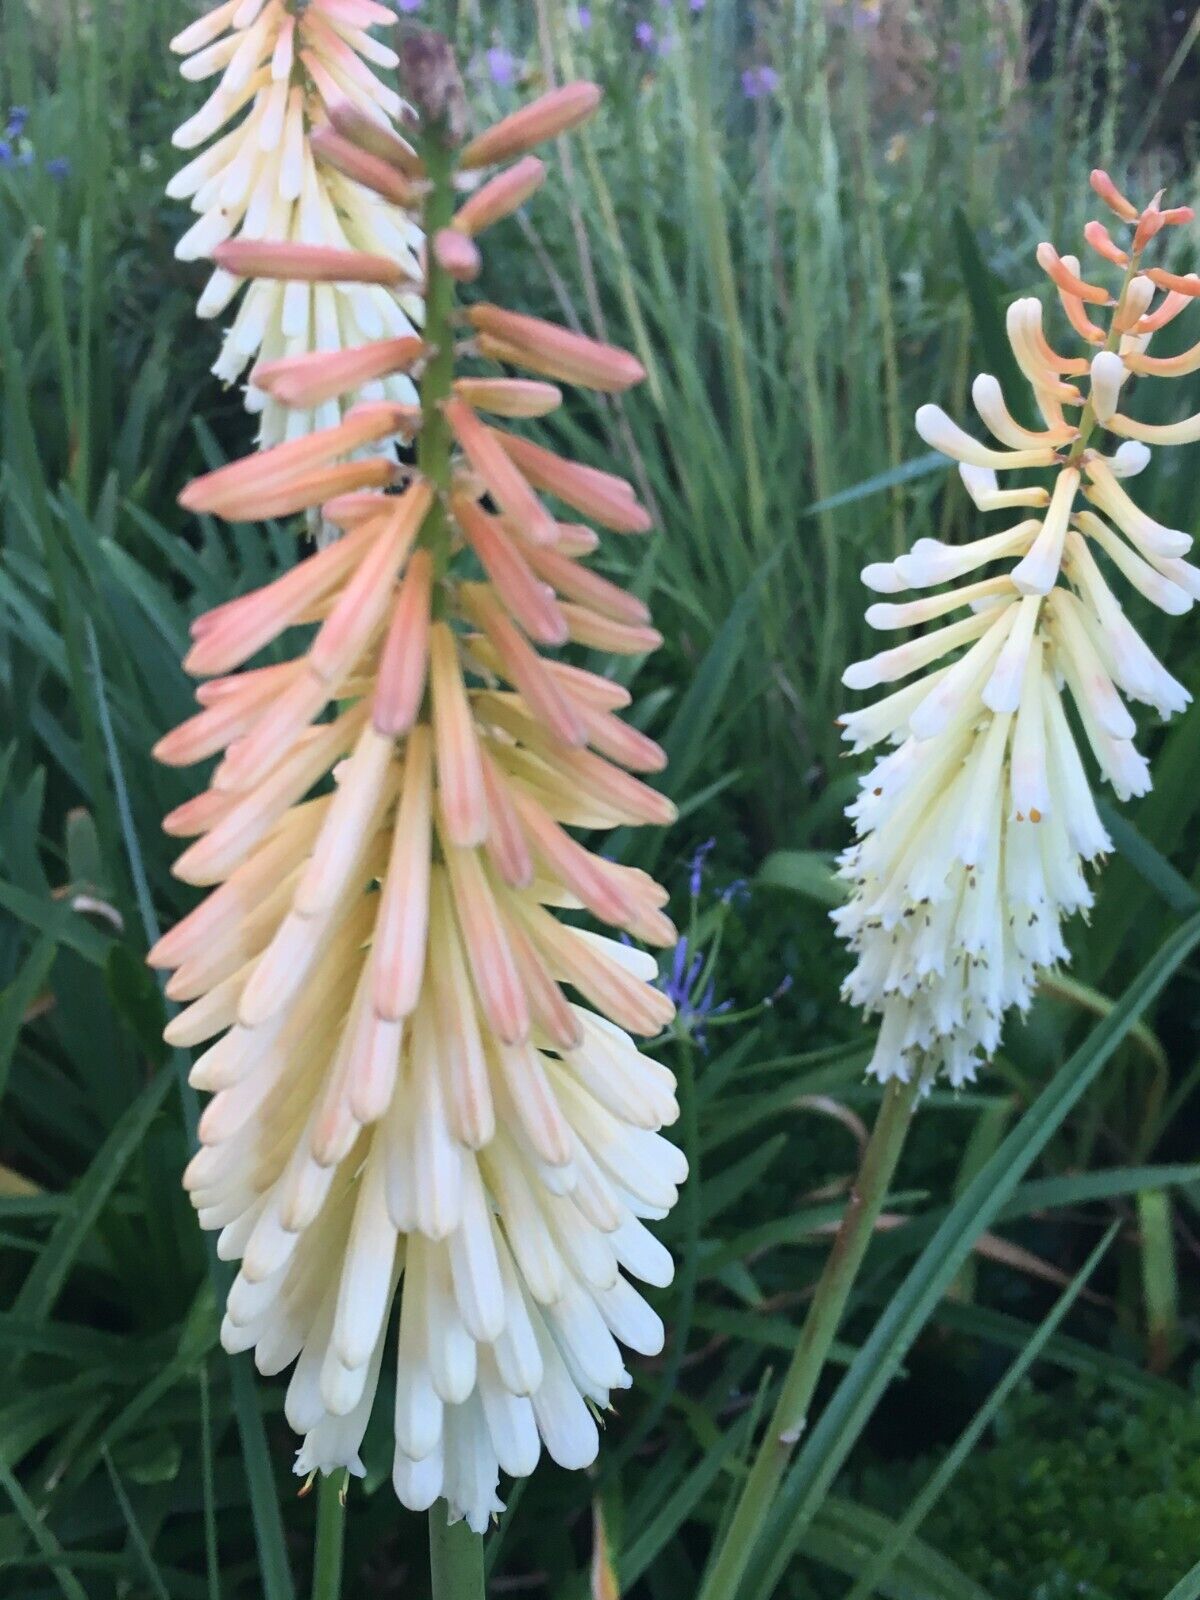 25 Toffee Nosed Torch Lily Hot Poker Flower Seeds Perennial Seed 895 US SELLER